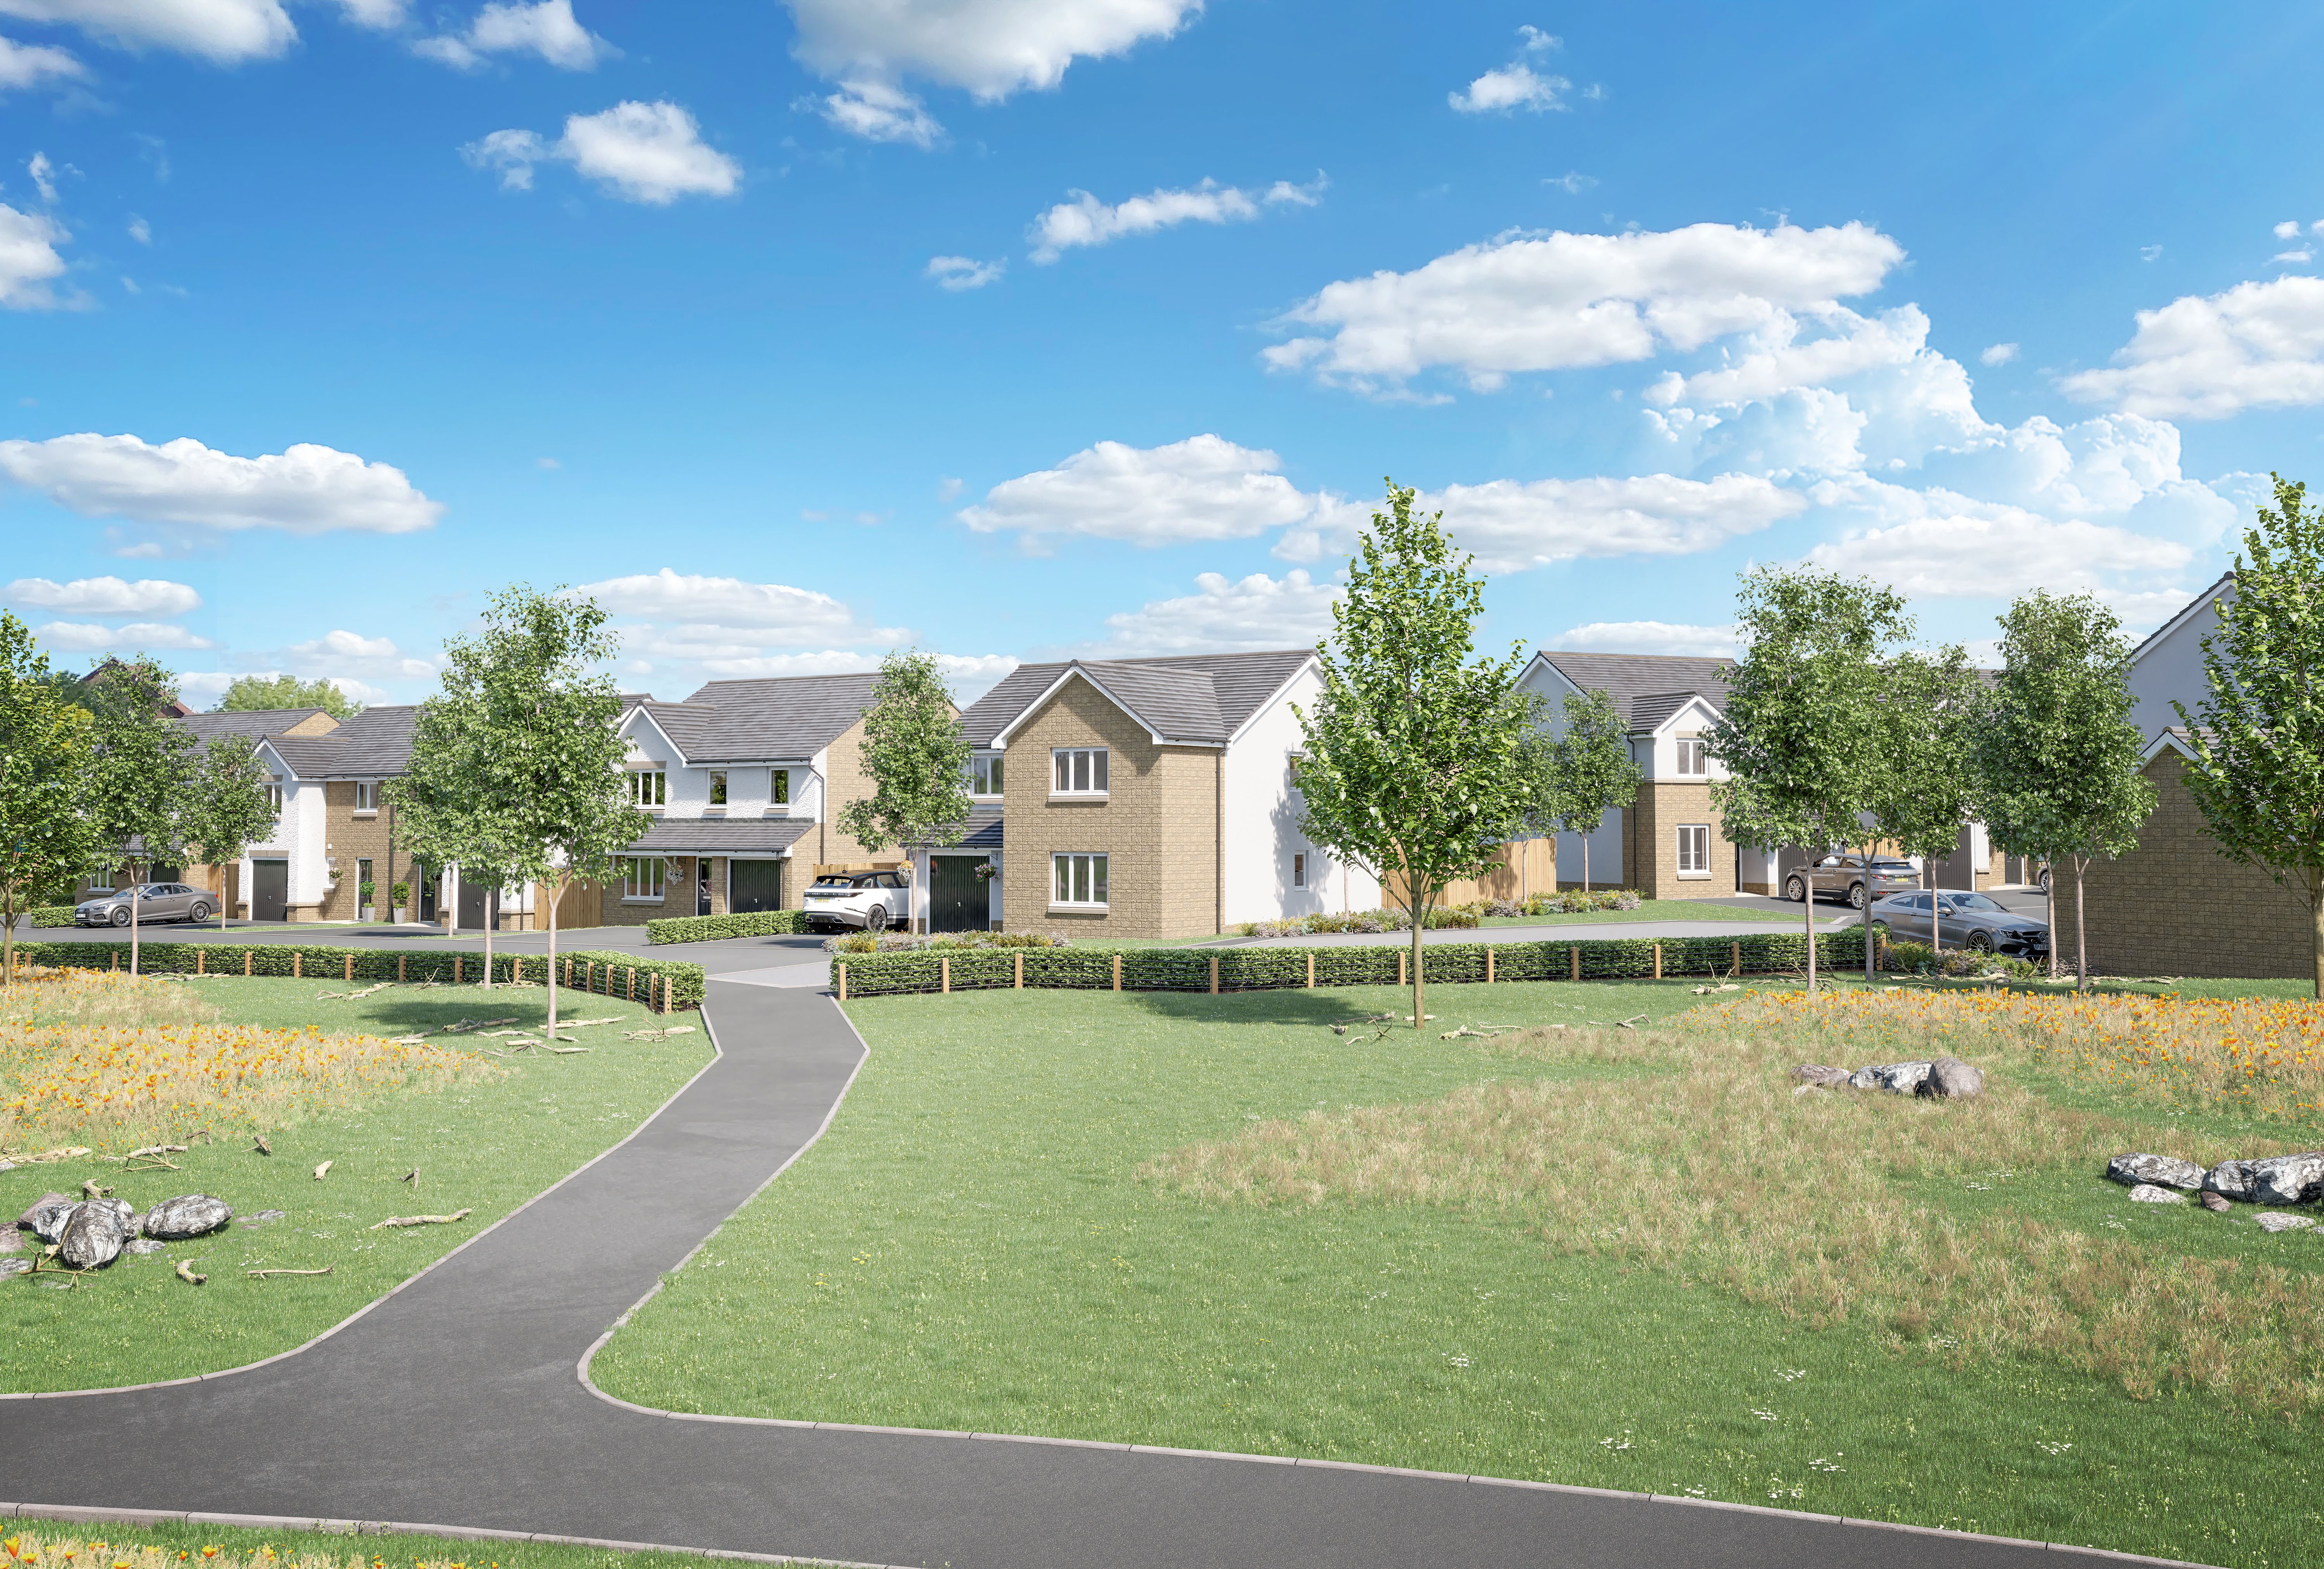 Taylor Wimpey secures detailed planning consent for Carnbroe development